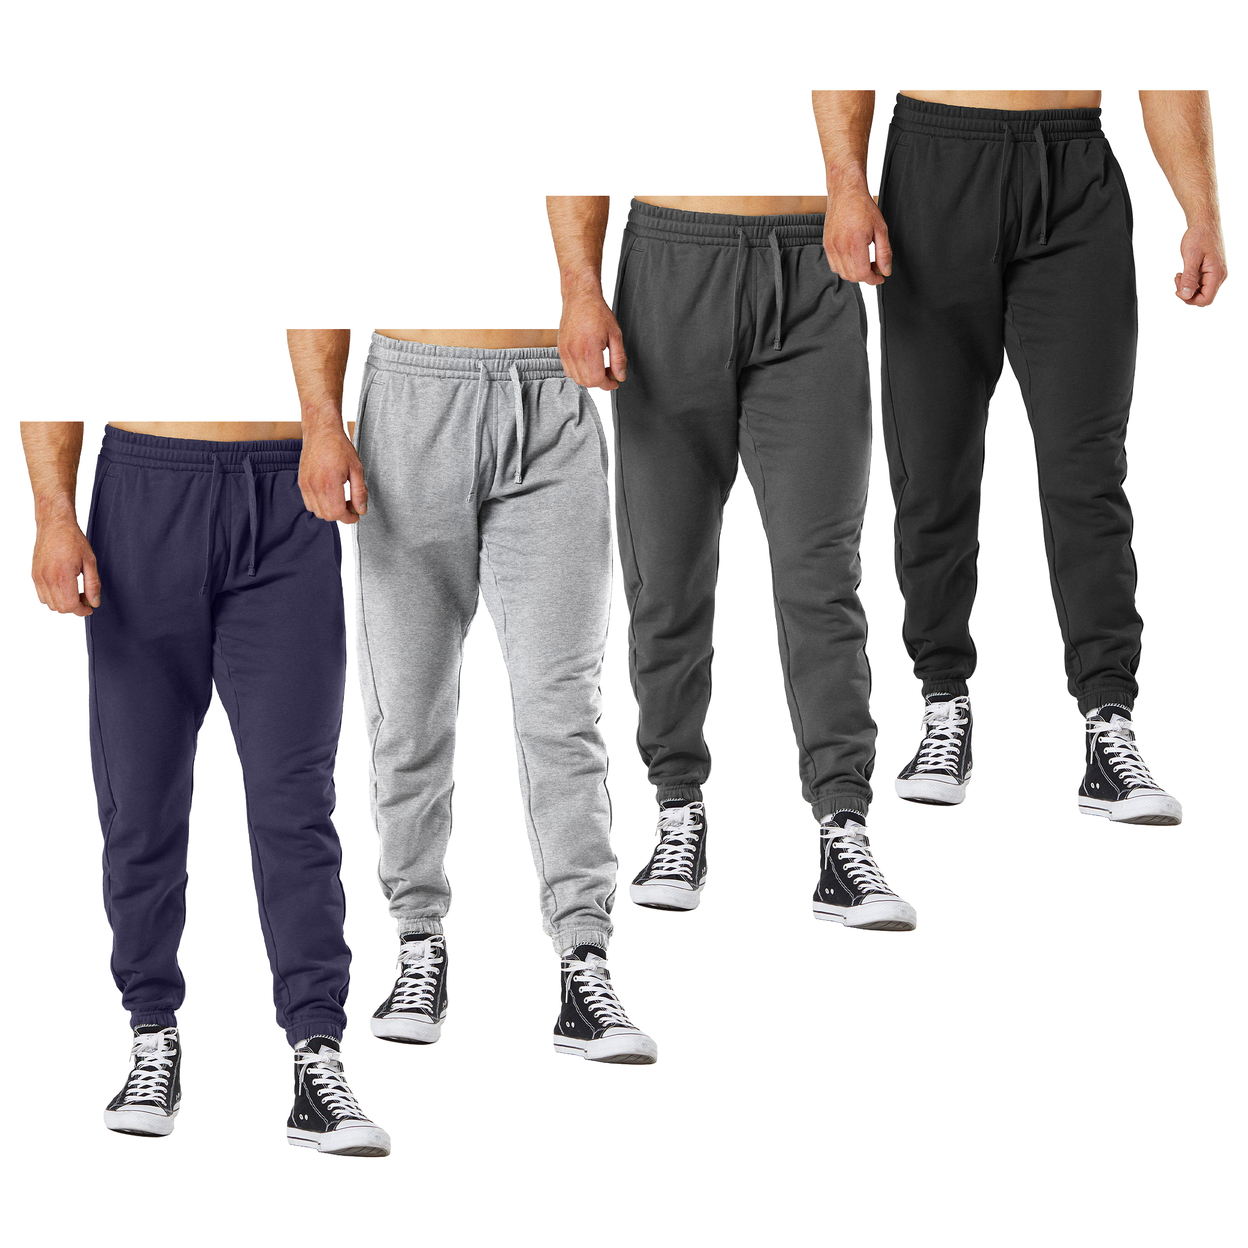 Multi-Pack: Men's Ultra-Soft Cozy Winter Warm Casual Fleece-Lined Sweatpants Jogger - 3-pack, X-large